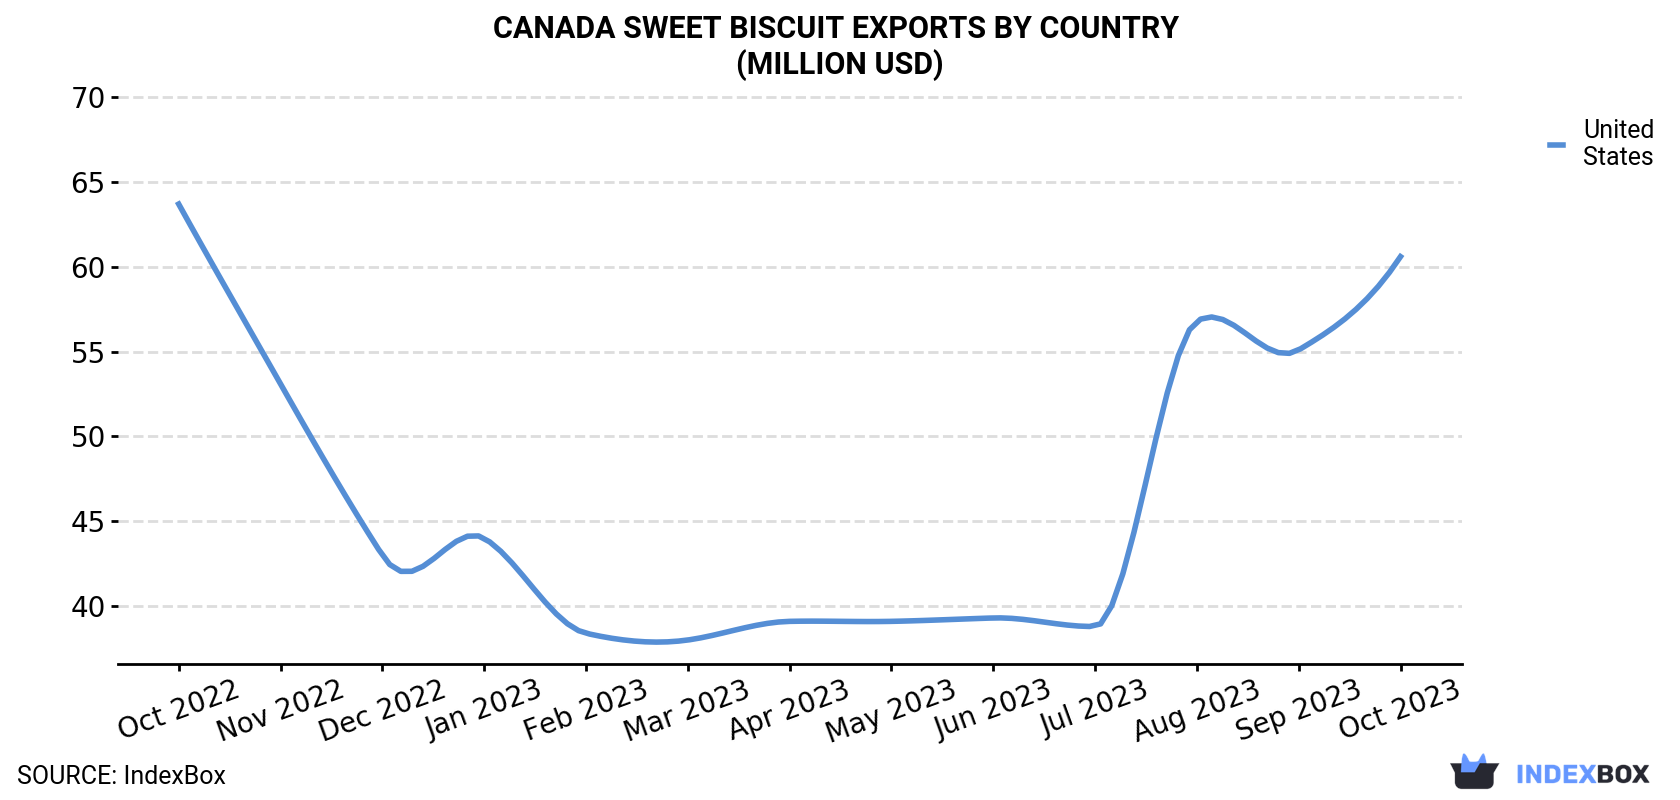 Canada Sweet Biscuit Exports By Country (Million USD)